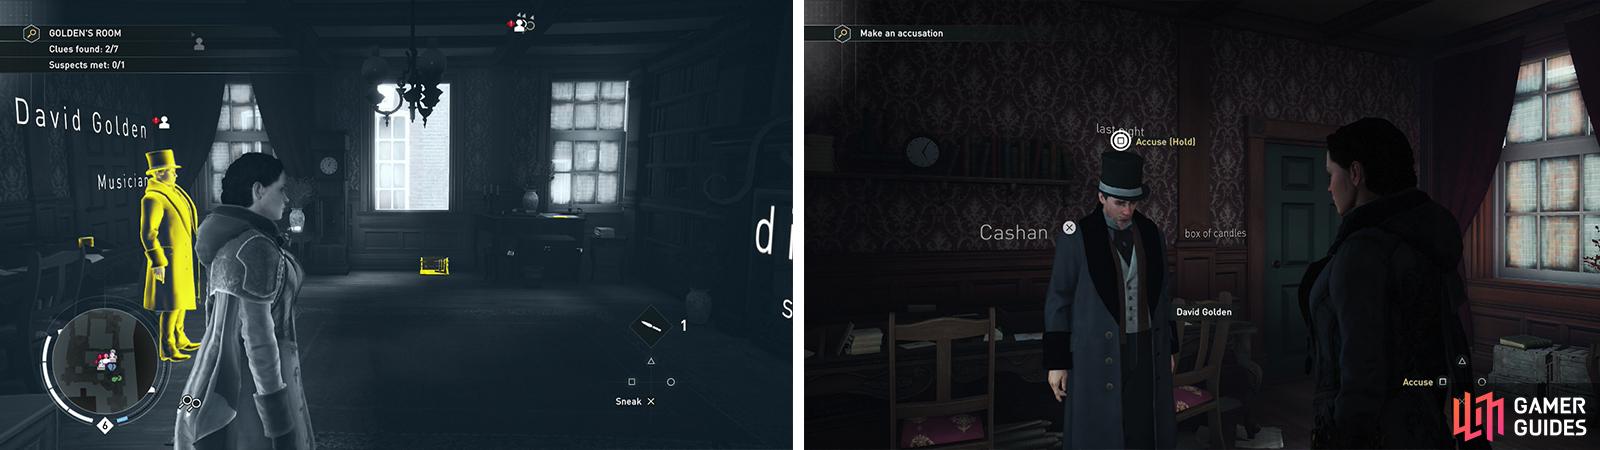 Loot the clues in the Golden’s Room (left) and then chat with the suspect (right).